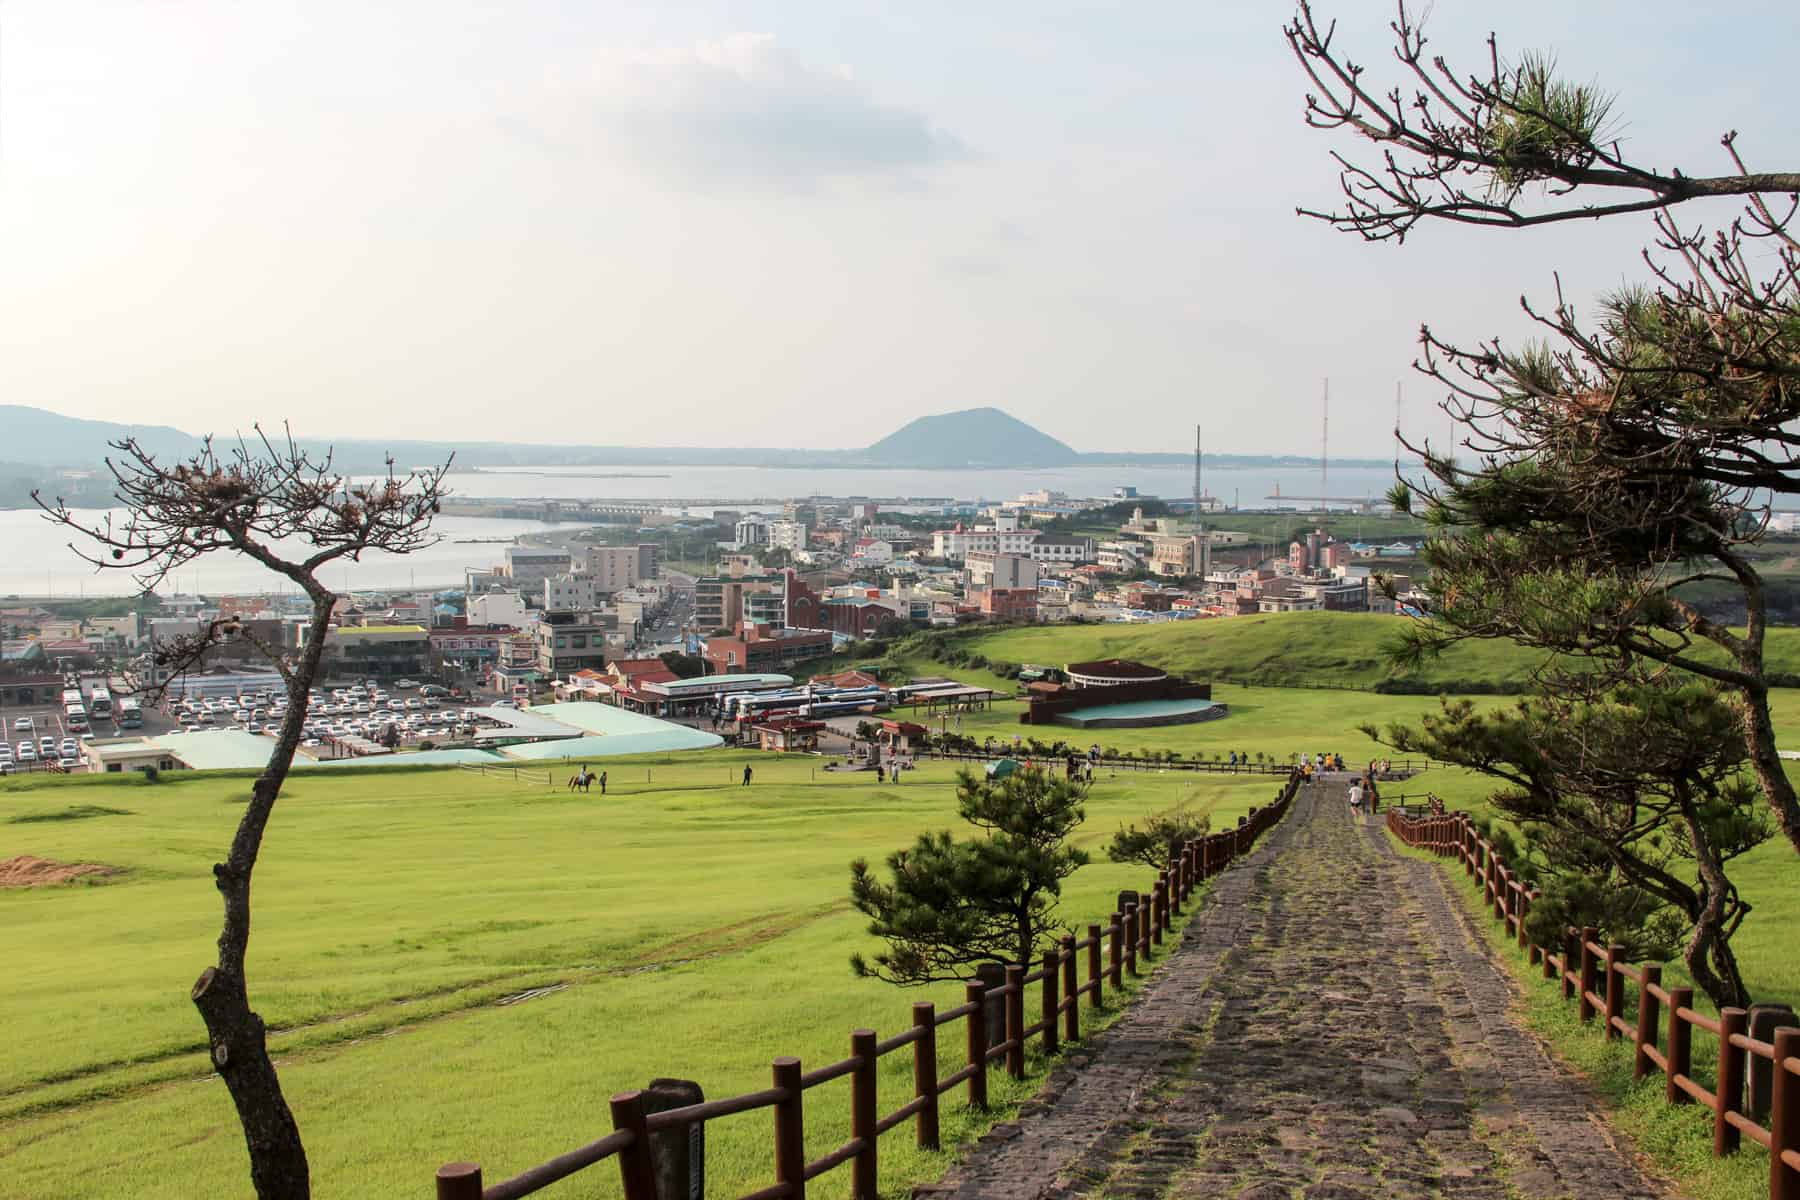 A view from the mountain pathway leading up Seongsan ilchulbong Peak on Jeju Island, looking down towards village buildinngs, the coastline and a small mountain in the far ocean distance